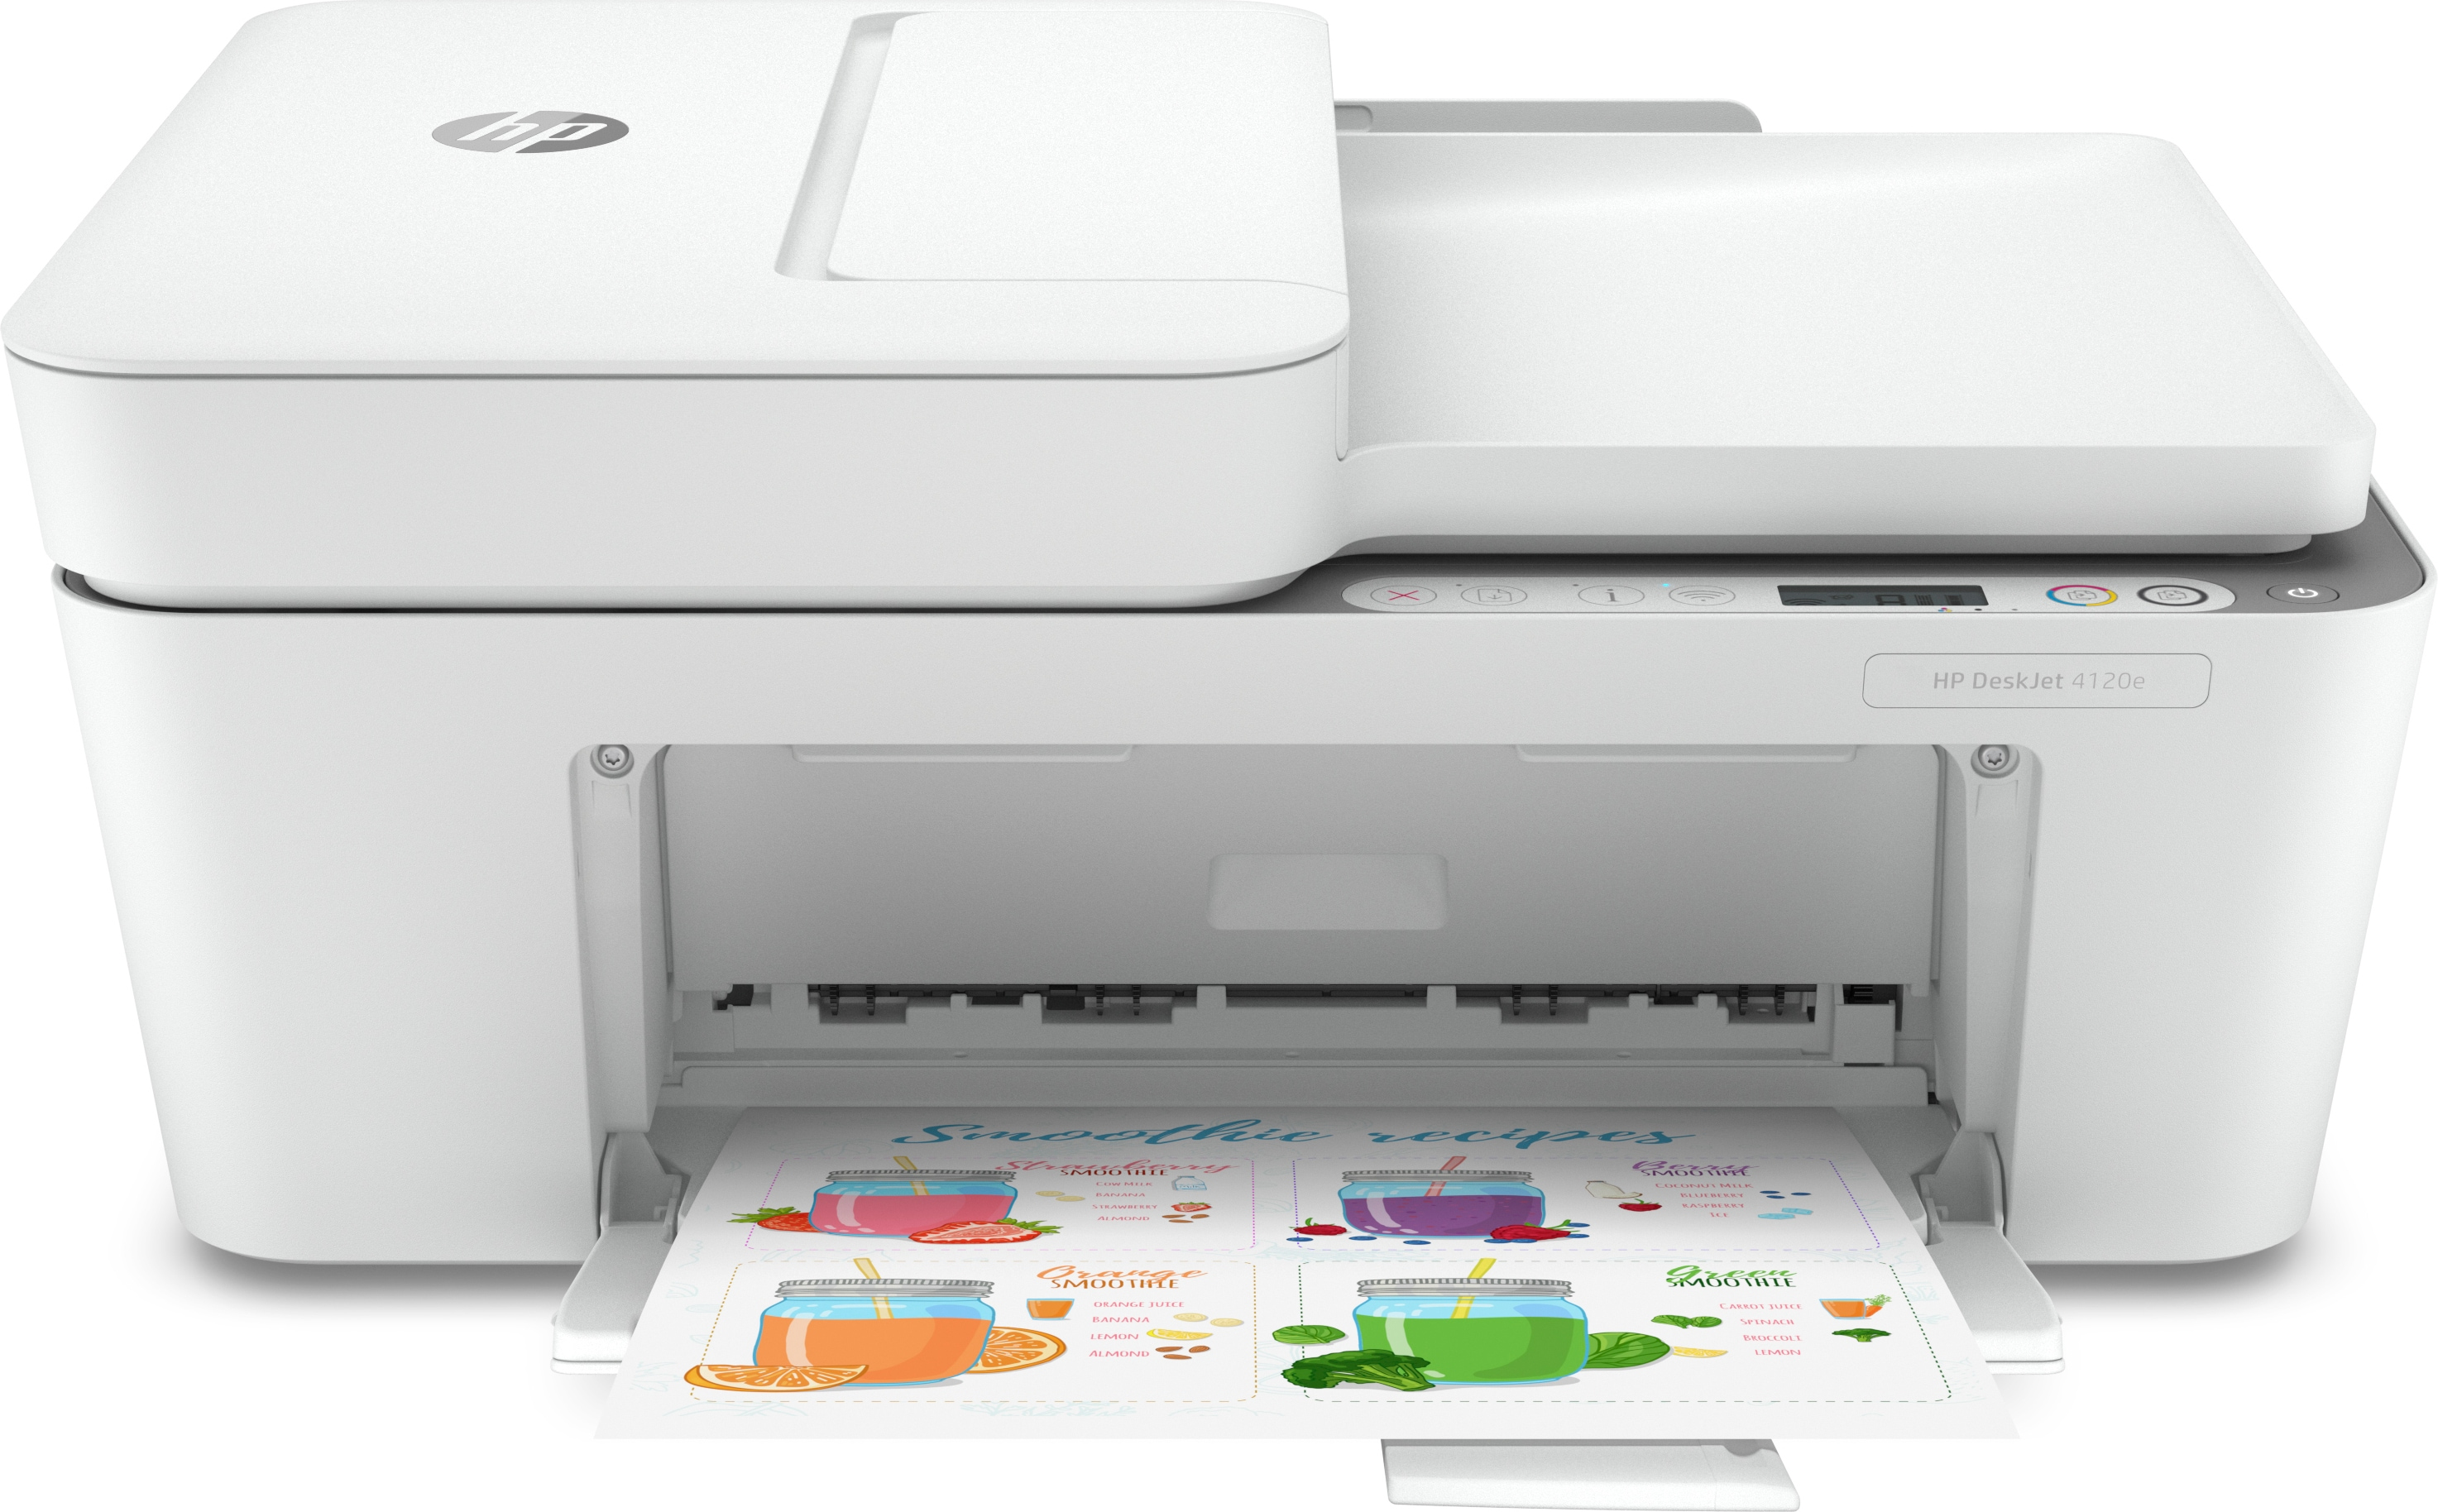  DeskJet 4120e All-in-One A4 color 5.5ppm Print Scan Copy